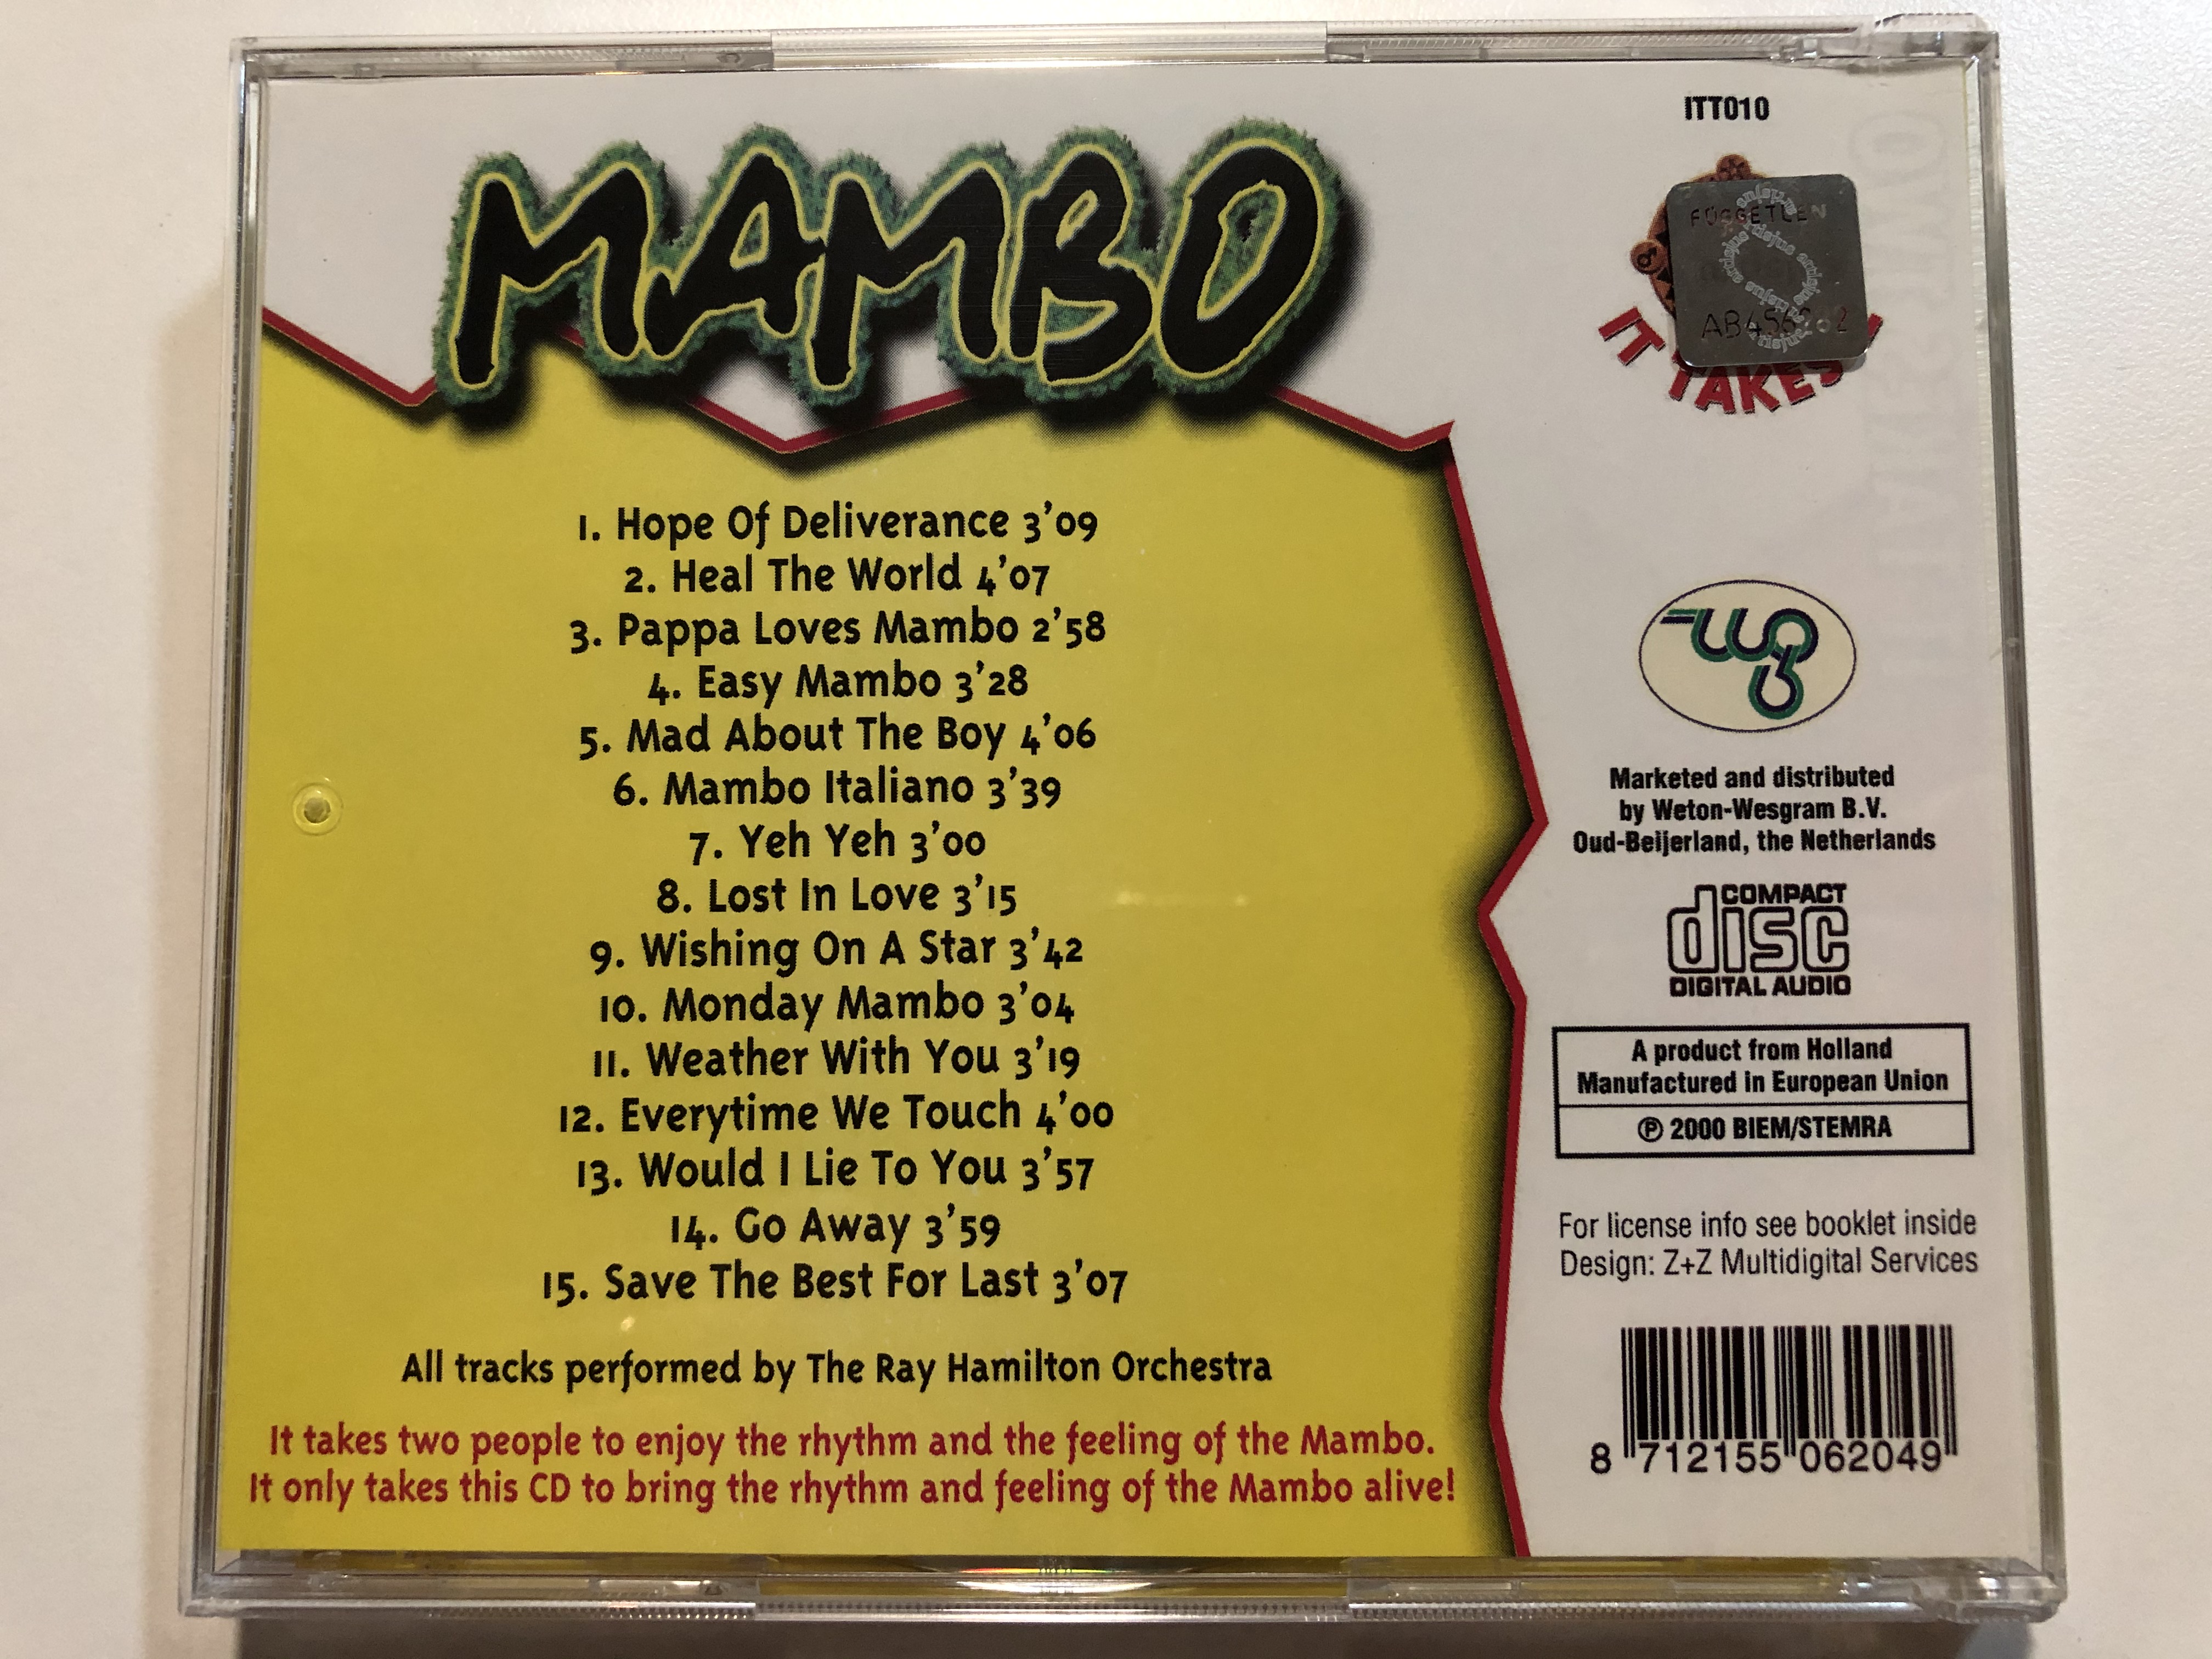 mambo-hope-of-deliverance-pappa-loves-mambo-mad-about-the-boy-mambo-italiano.-wishing-on-a-star-weather-with-you-it-takes-two-audio-cd-2000-itt010-2-.jpg